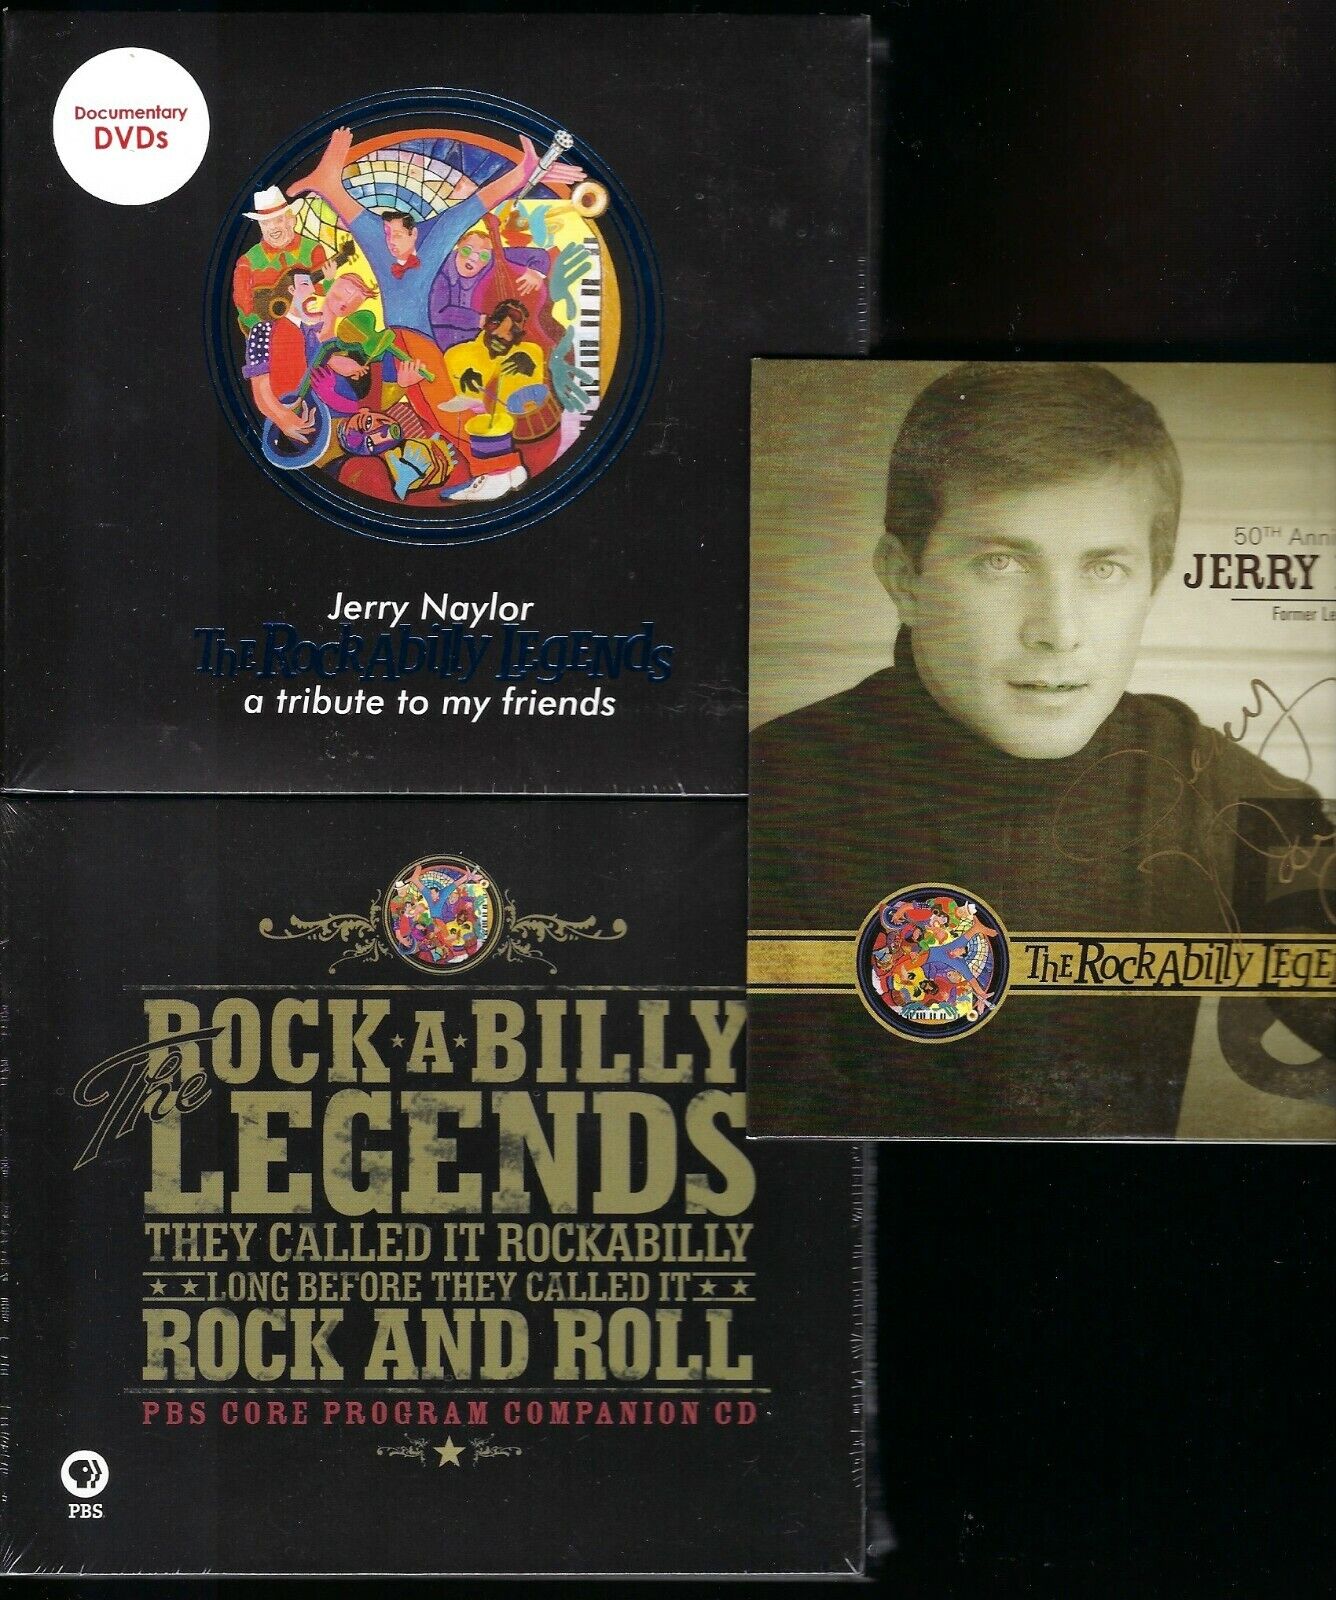 The ROCKABILLY LEGENDS A Tribute To My Friends DVD CD Jerry Naylor SIGNED BUNDLE